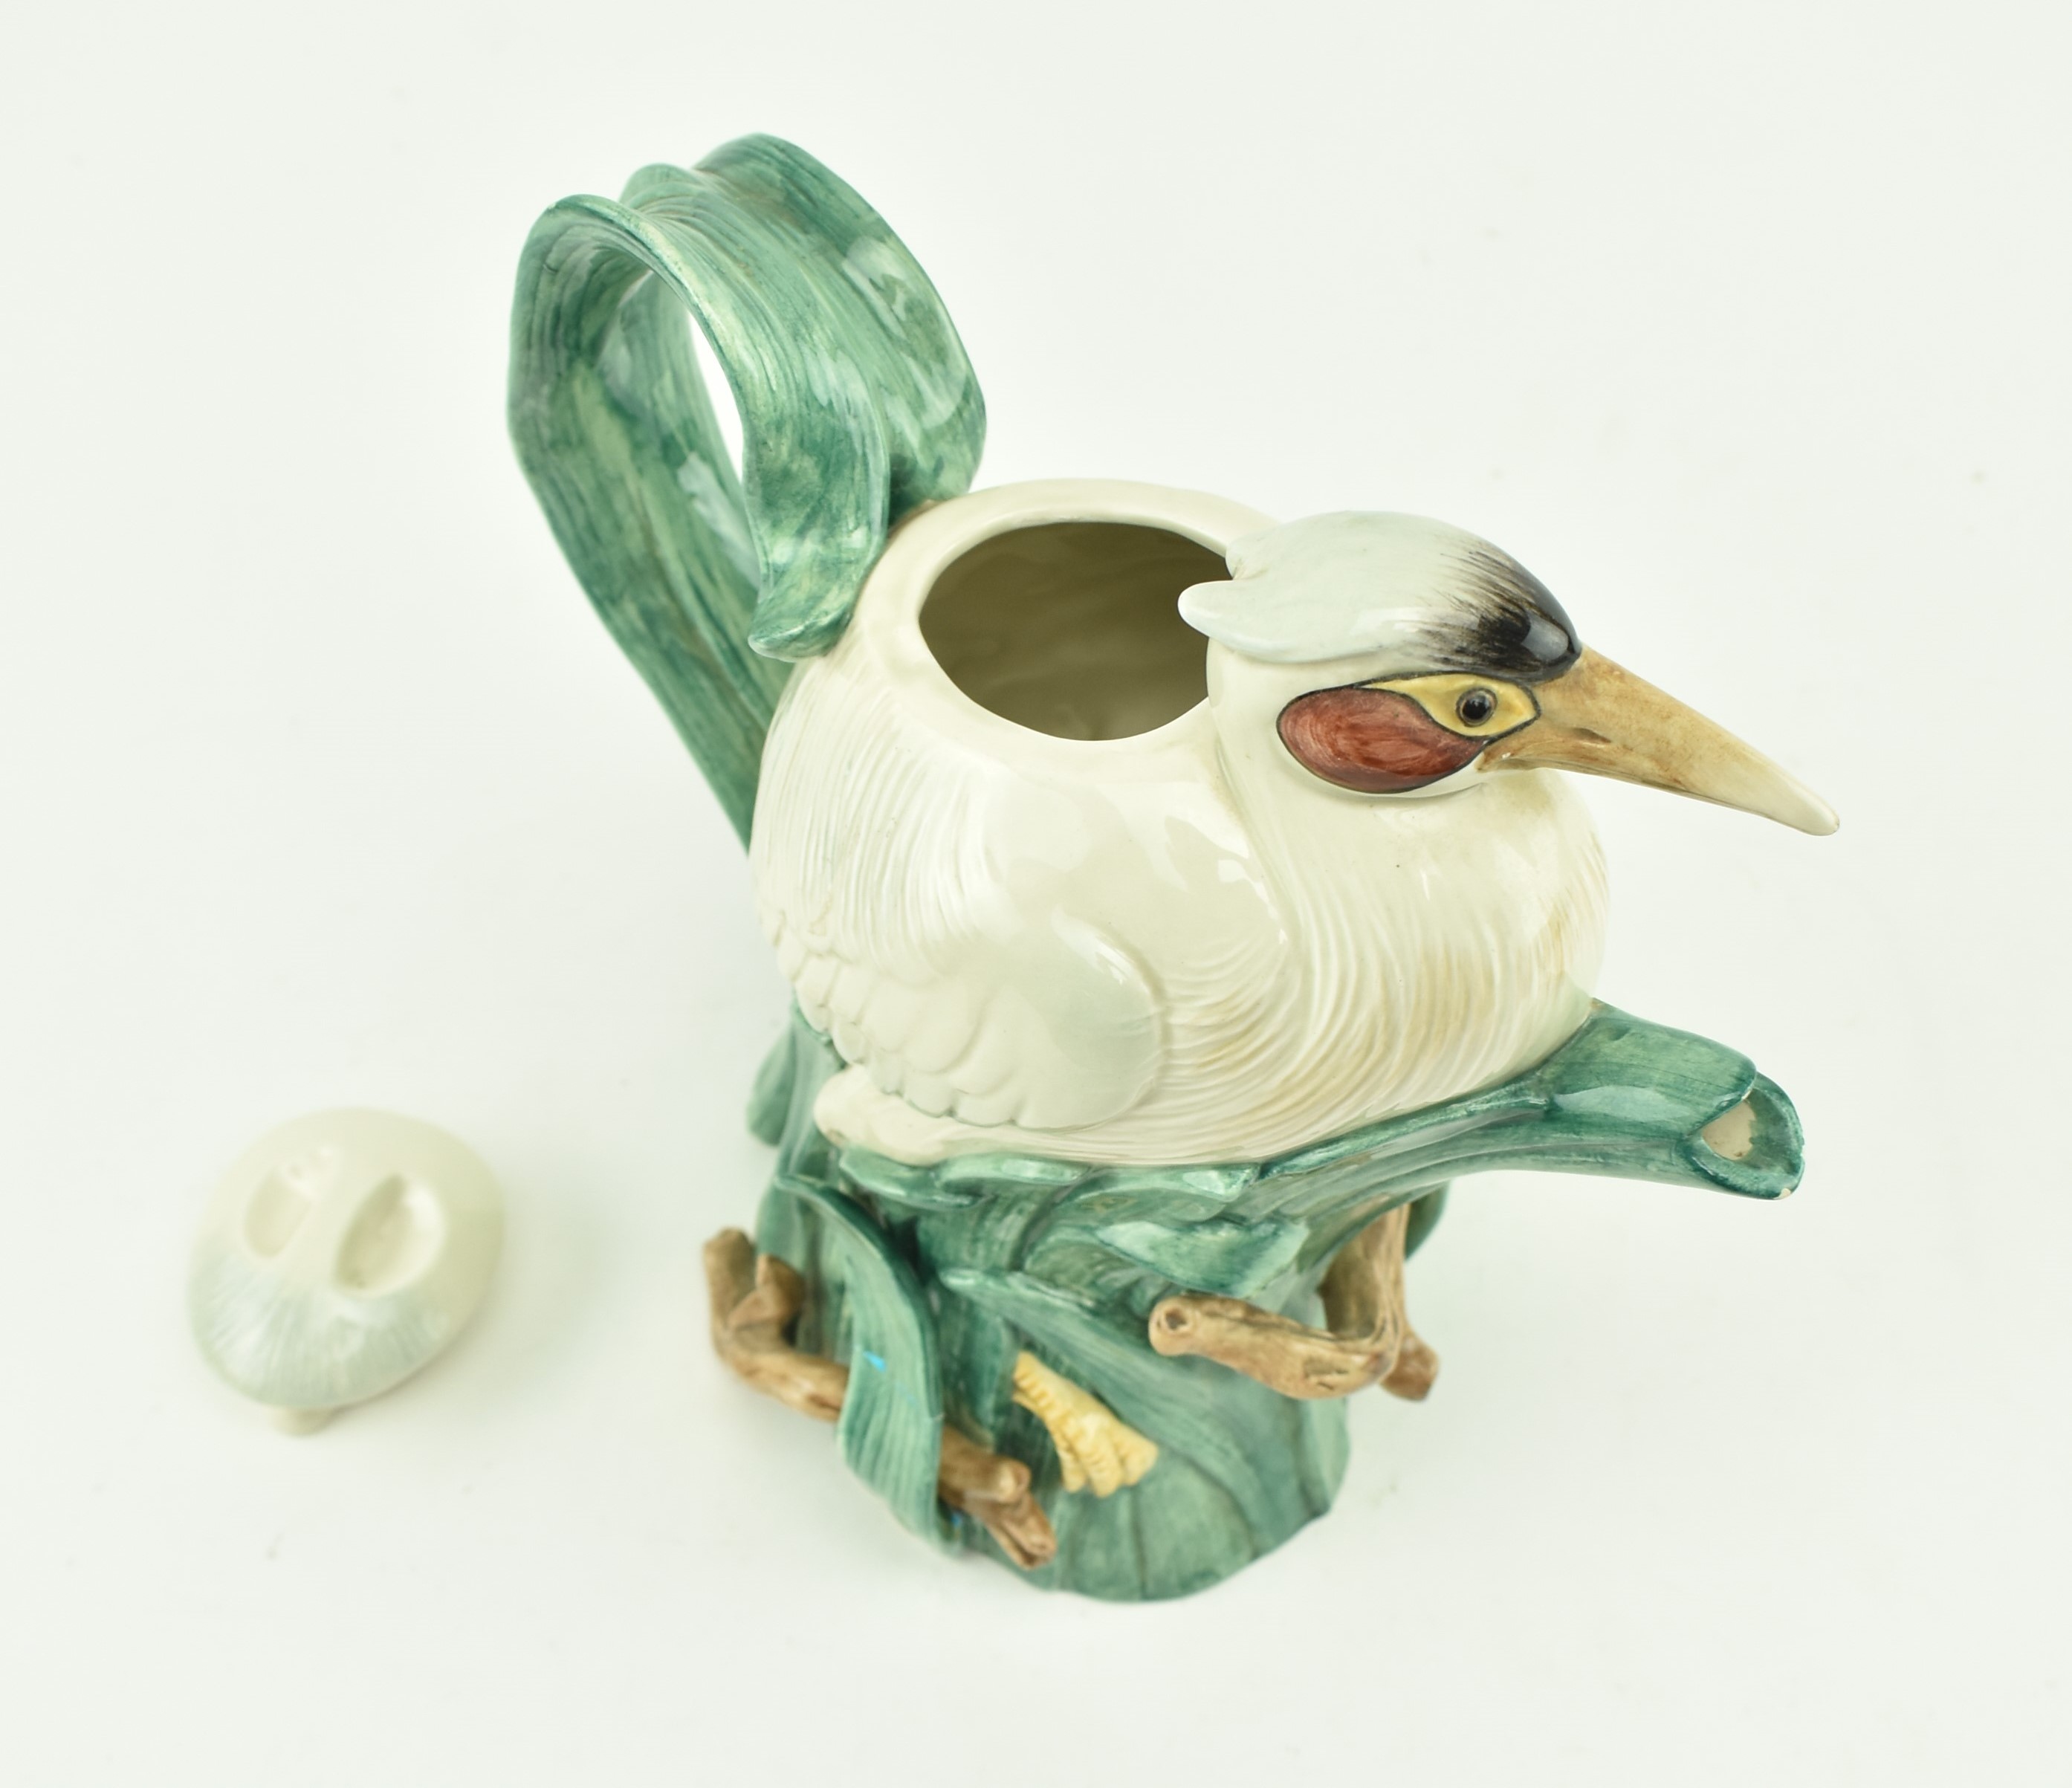 VINTAGE FITZ & FLOYD CERAMIC TEAPOT IN THE SHAPE OF A HERON - Image 2 of 6